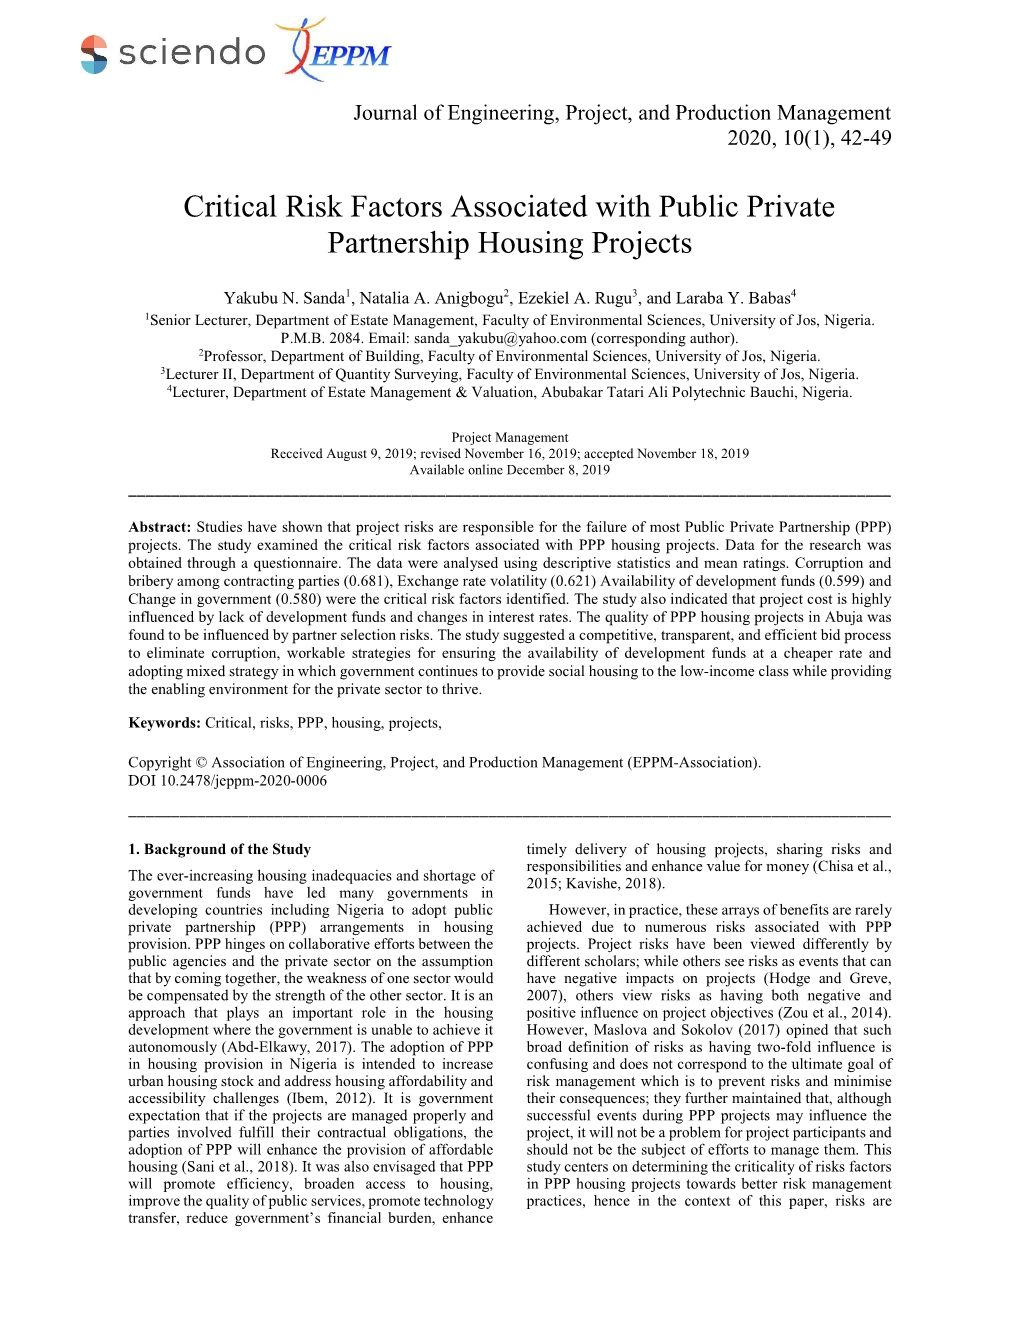 Critical Risk Factors Associated with Public Private Partnership Housing Projects